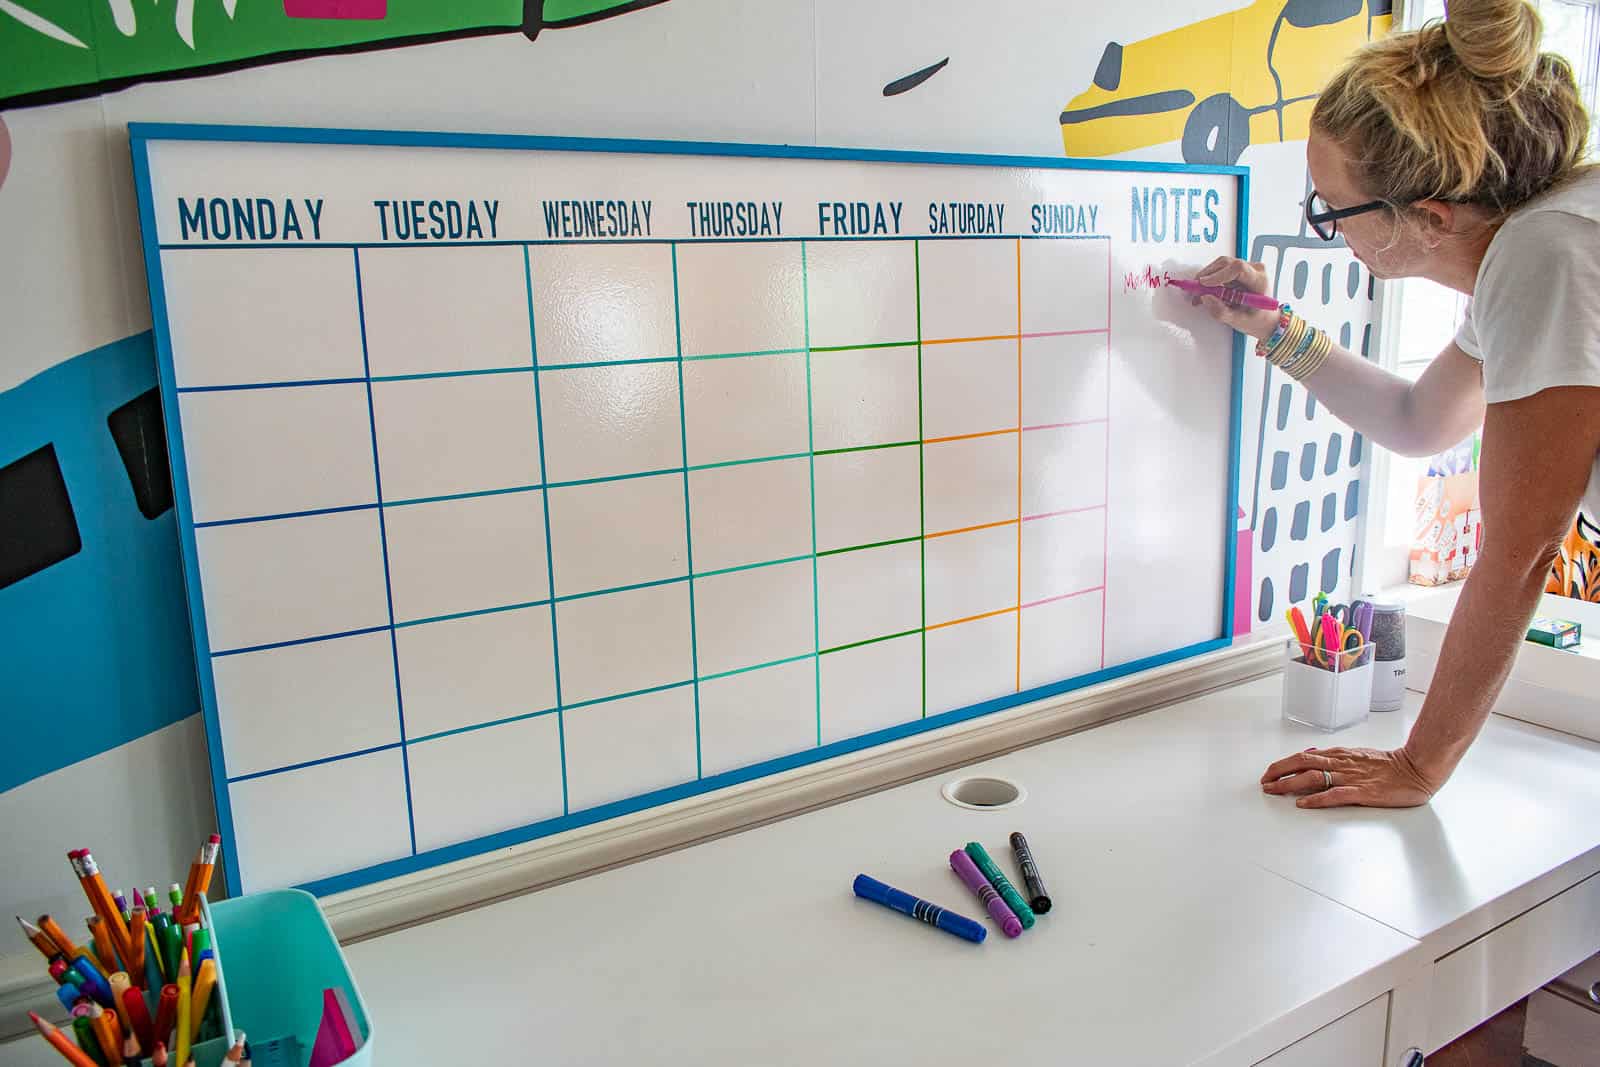 How To Organize A Whiteboard